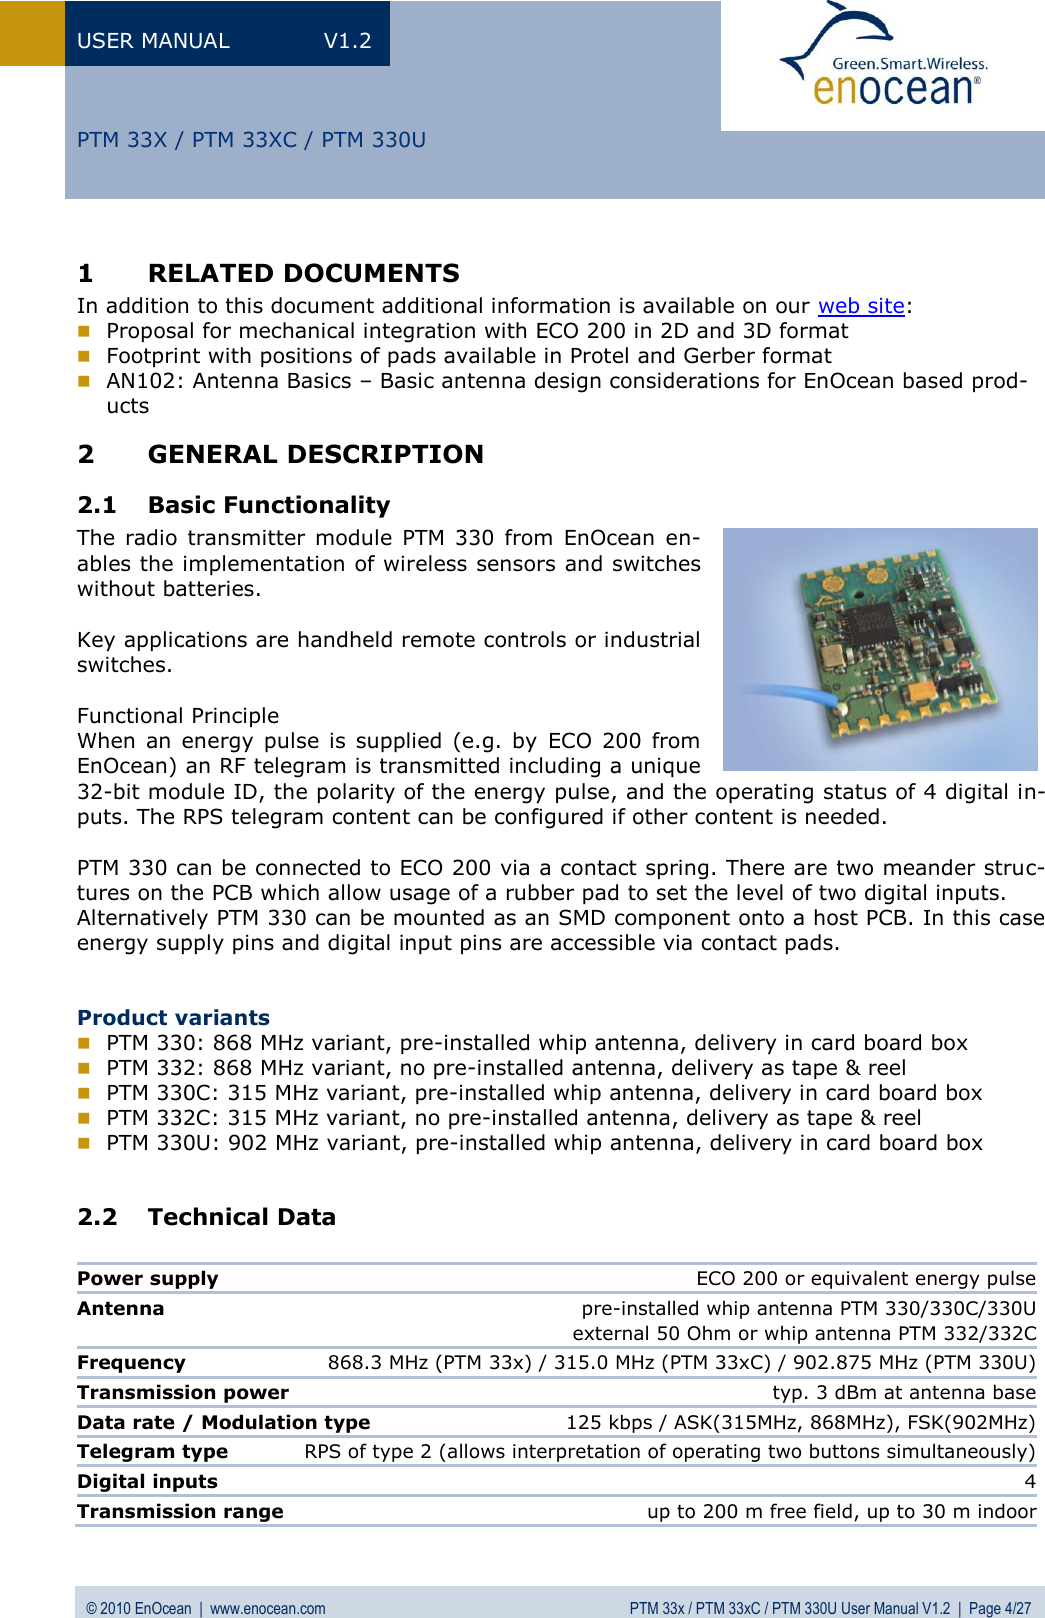 USER MANUAL  V1.2 © 2010 EnOcean  |  www.enocean.com  PTM 33x / PTM 33xC / PTM 330U User Manual V1.2  |  Page 4/27   PTM 33X / PTM 33XC / PTM 330U 1 RELATED DOCUMENTS In addition to this document additional information is available on our web site:  Proposal for mechanical integration with ECO 200 in 2D and 3D format  Footprint with positions of pads available in Protel and Gerber format  AN102: Antenna Basics – Basic antenna design considerations for EnOcean based prod-ucts 2 GENERAL DESCRIPTION 2.1 Basic Functionality The radio  transmitter  module PTM 330  from  EnOcean  en-ables the implementation of wireless sensors and switches without batteries.   Key applications are handheld remote controls or industrial switches.   Functional Principle When  an  energy  pulse is  supplied  (e.g.  by  ECO 200  from EnOcean) an RF telegram is transmitted including a unique 32-bit module ID, the polarity of the energy pulse, and the operating status of 4 digital in-puts. The RPS telegram content can be configured if other content is needed.  PTM 330 can be connected to ECO 200 via a contact spring. There are two meander struc-tures on the PCB which allow usage of a rubber pad to set the level of two digital inputs.  Alternatively PTM 330 can be mounted as an SMD component onto a host PCB. In this case energy supply pins and digital input pins are accessible via contact pads.   Product variants  PTM 330: 868 MHz variant, pre-installed whip antenna, delivery in card board box  PTM 332: 868 MHz variant, no pre-installed antenna, delivery as tape &amp; reel  PTM 330C: 315 MHz variant, pre-installed whip antenna, delivery in card board box  PTM 332C: 315 MHz variant, no pre-installed antenna, delivery as tape &amp; reel  PTM 330U: 902 MHz variant, pre-installed whip antenna, delivery in card board box  2.2 Technical Data   Power supply  ECO 200 or equivalent energy pulse  Antenna  pre-installed whip antenna PTM 330/330C/330U                                                                        external 50 Ohm or whip antenna PTM 332/332C Frequency  868.3 MHz (PTM 33x) / 315.0 MHz (PTM 33xC) / 902.875 MHz (PTM 330U)  Transmission power  typ. 3 dBm at antenna base Data rate / Modulation type  125 kbps / ASK(315MHz, 868MHz), FSK(902MHz) Telegram type   RPS of type 2 (allows interpretation of operating two buttons simultaneously) Digital inputs   4 Transmission range   up to 200 m free field, up to 30 m indoor 